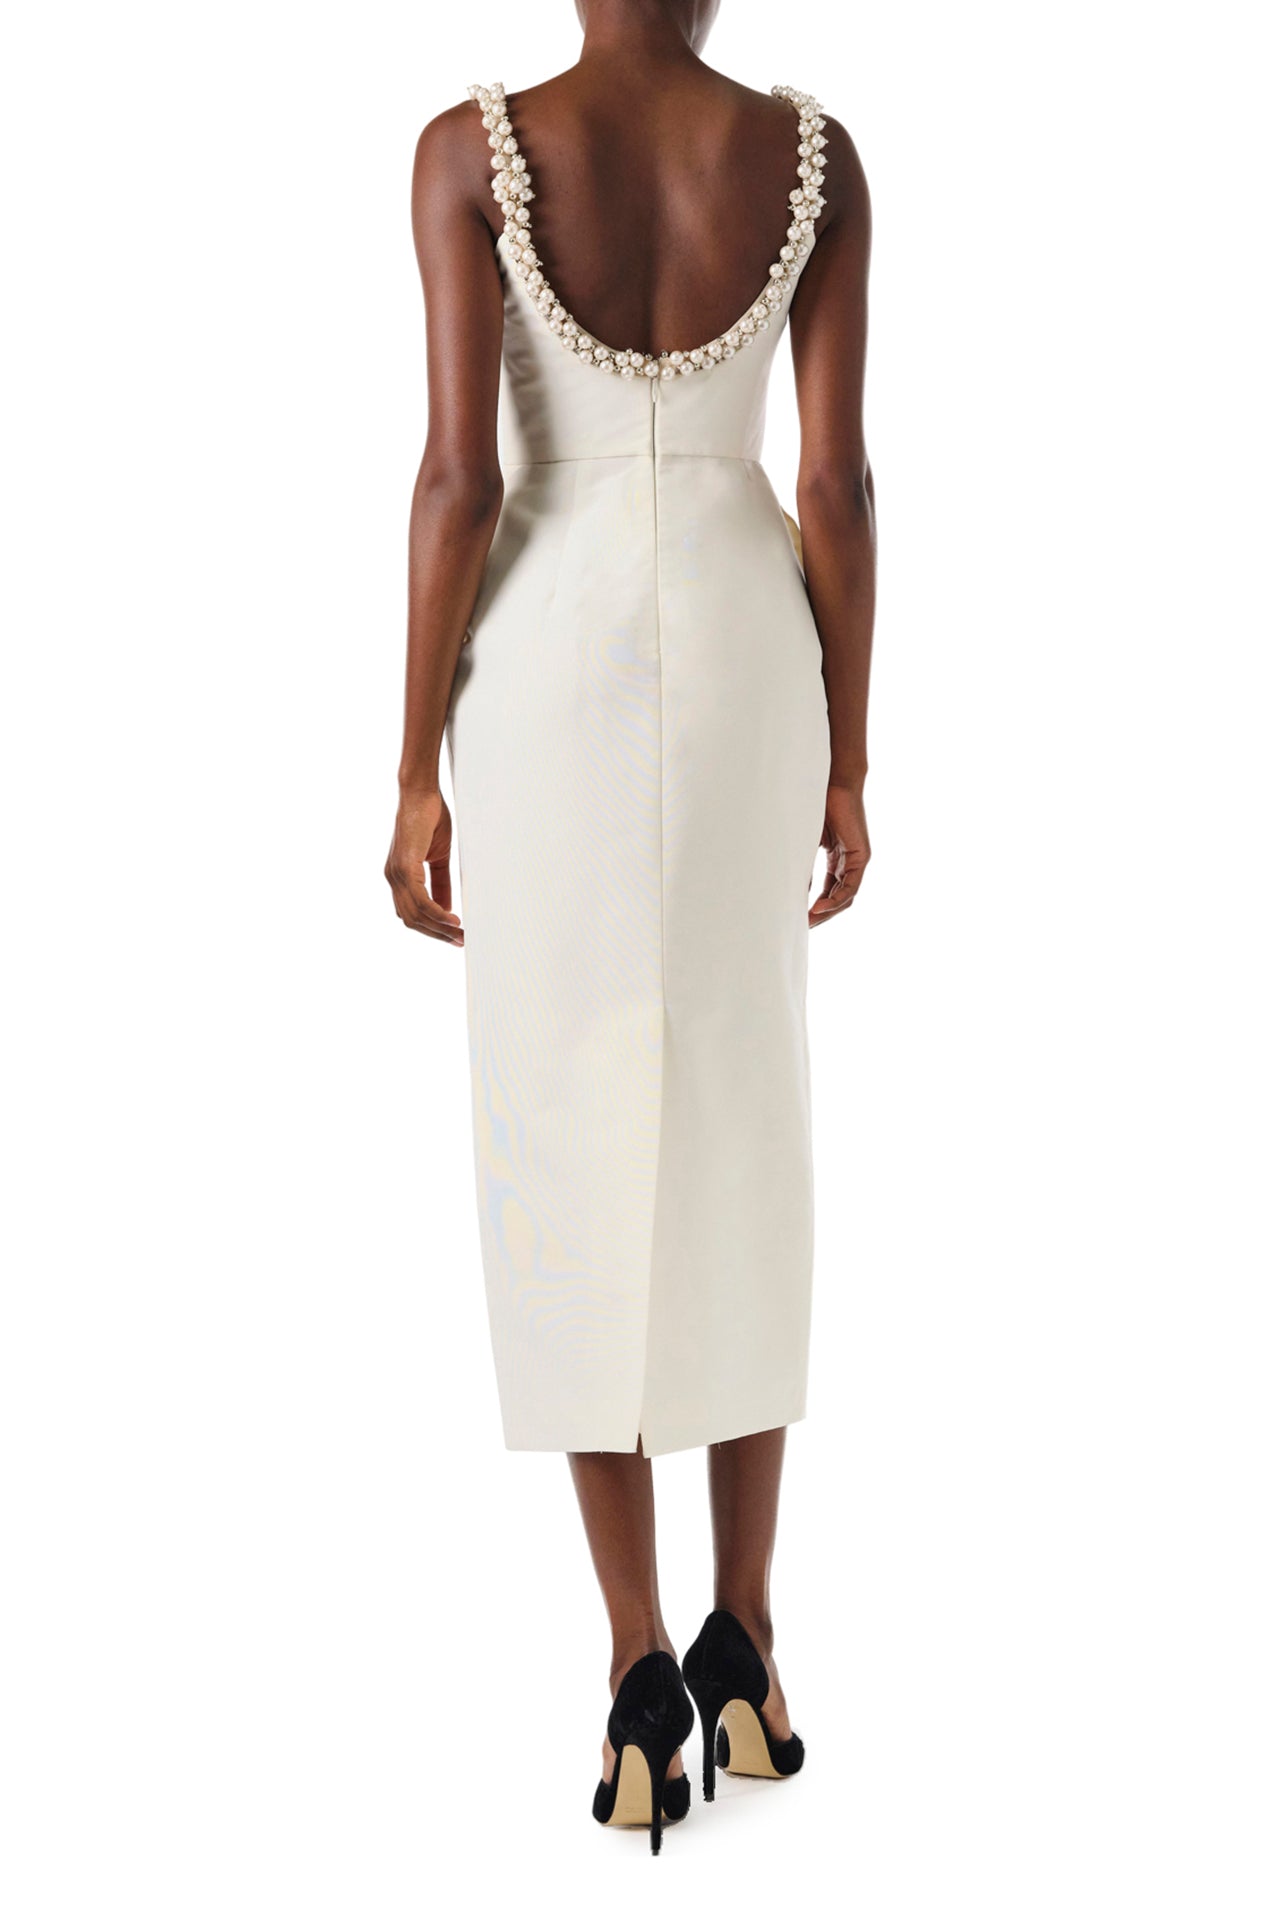 Monique Lhuillier Fall 2024 sleeveless, scoop neck cocktail dress with pearl embroidered neckline, low back, pockets, and natural waist seam - back.